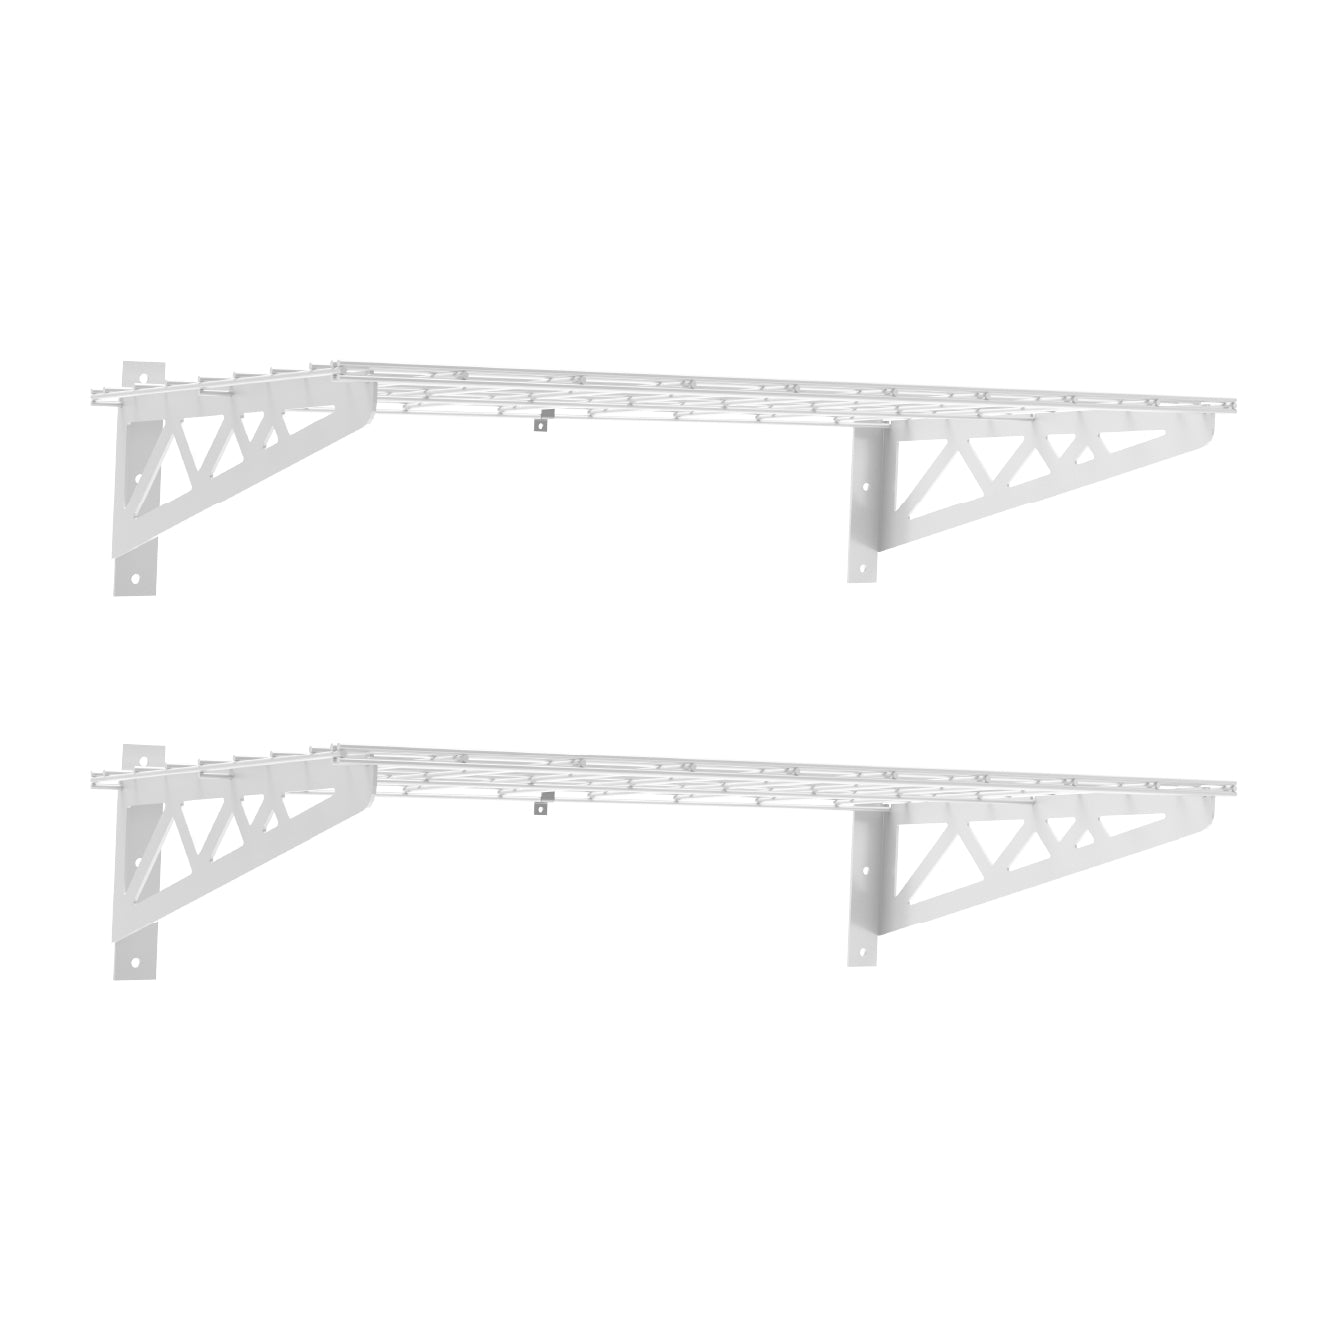 18’ x 36’ Wall Shelves (Two Pack with Hooks) - Mounted